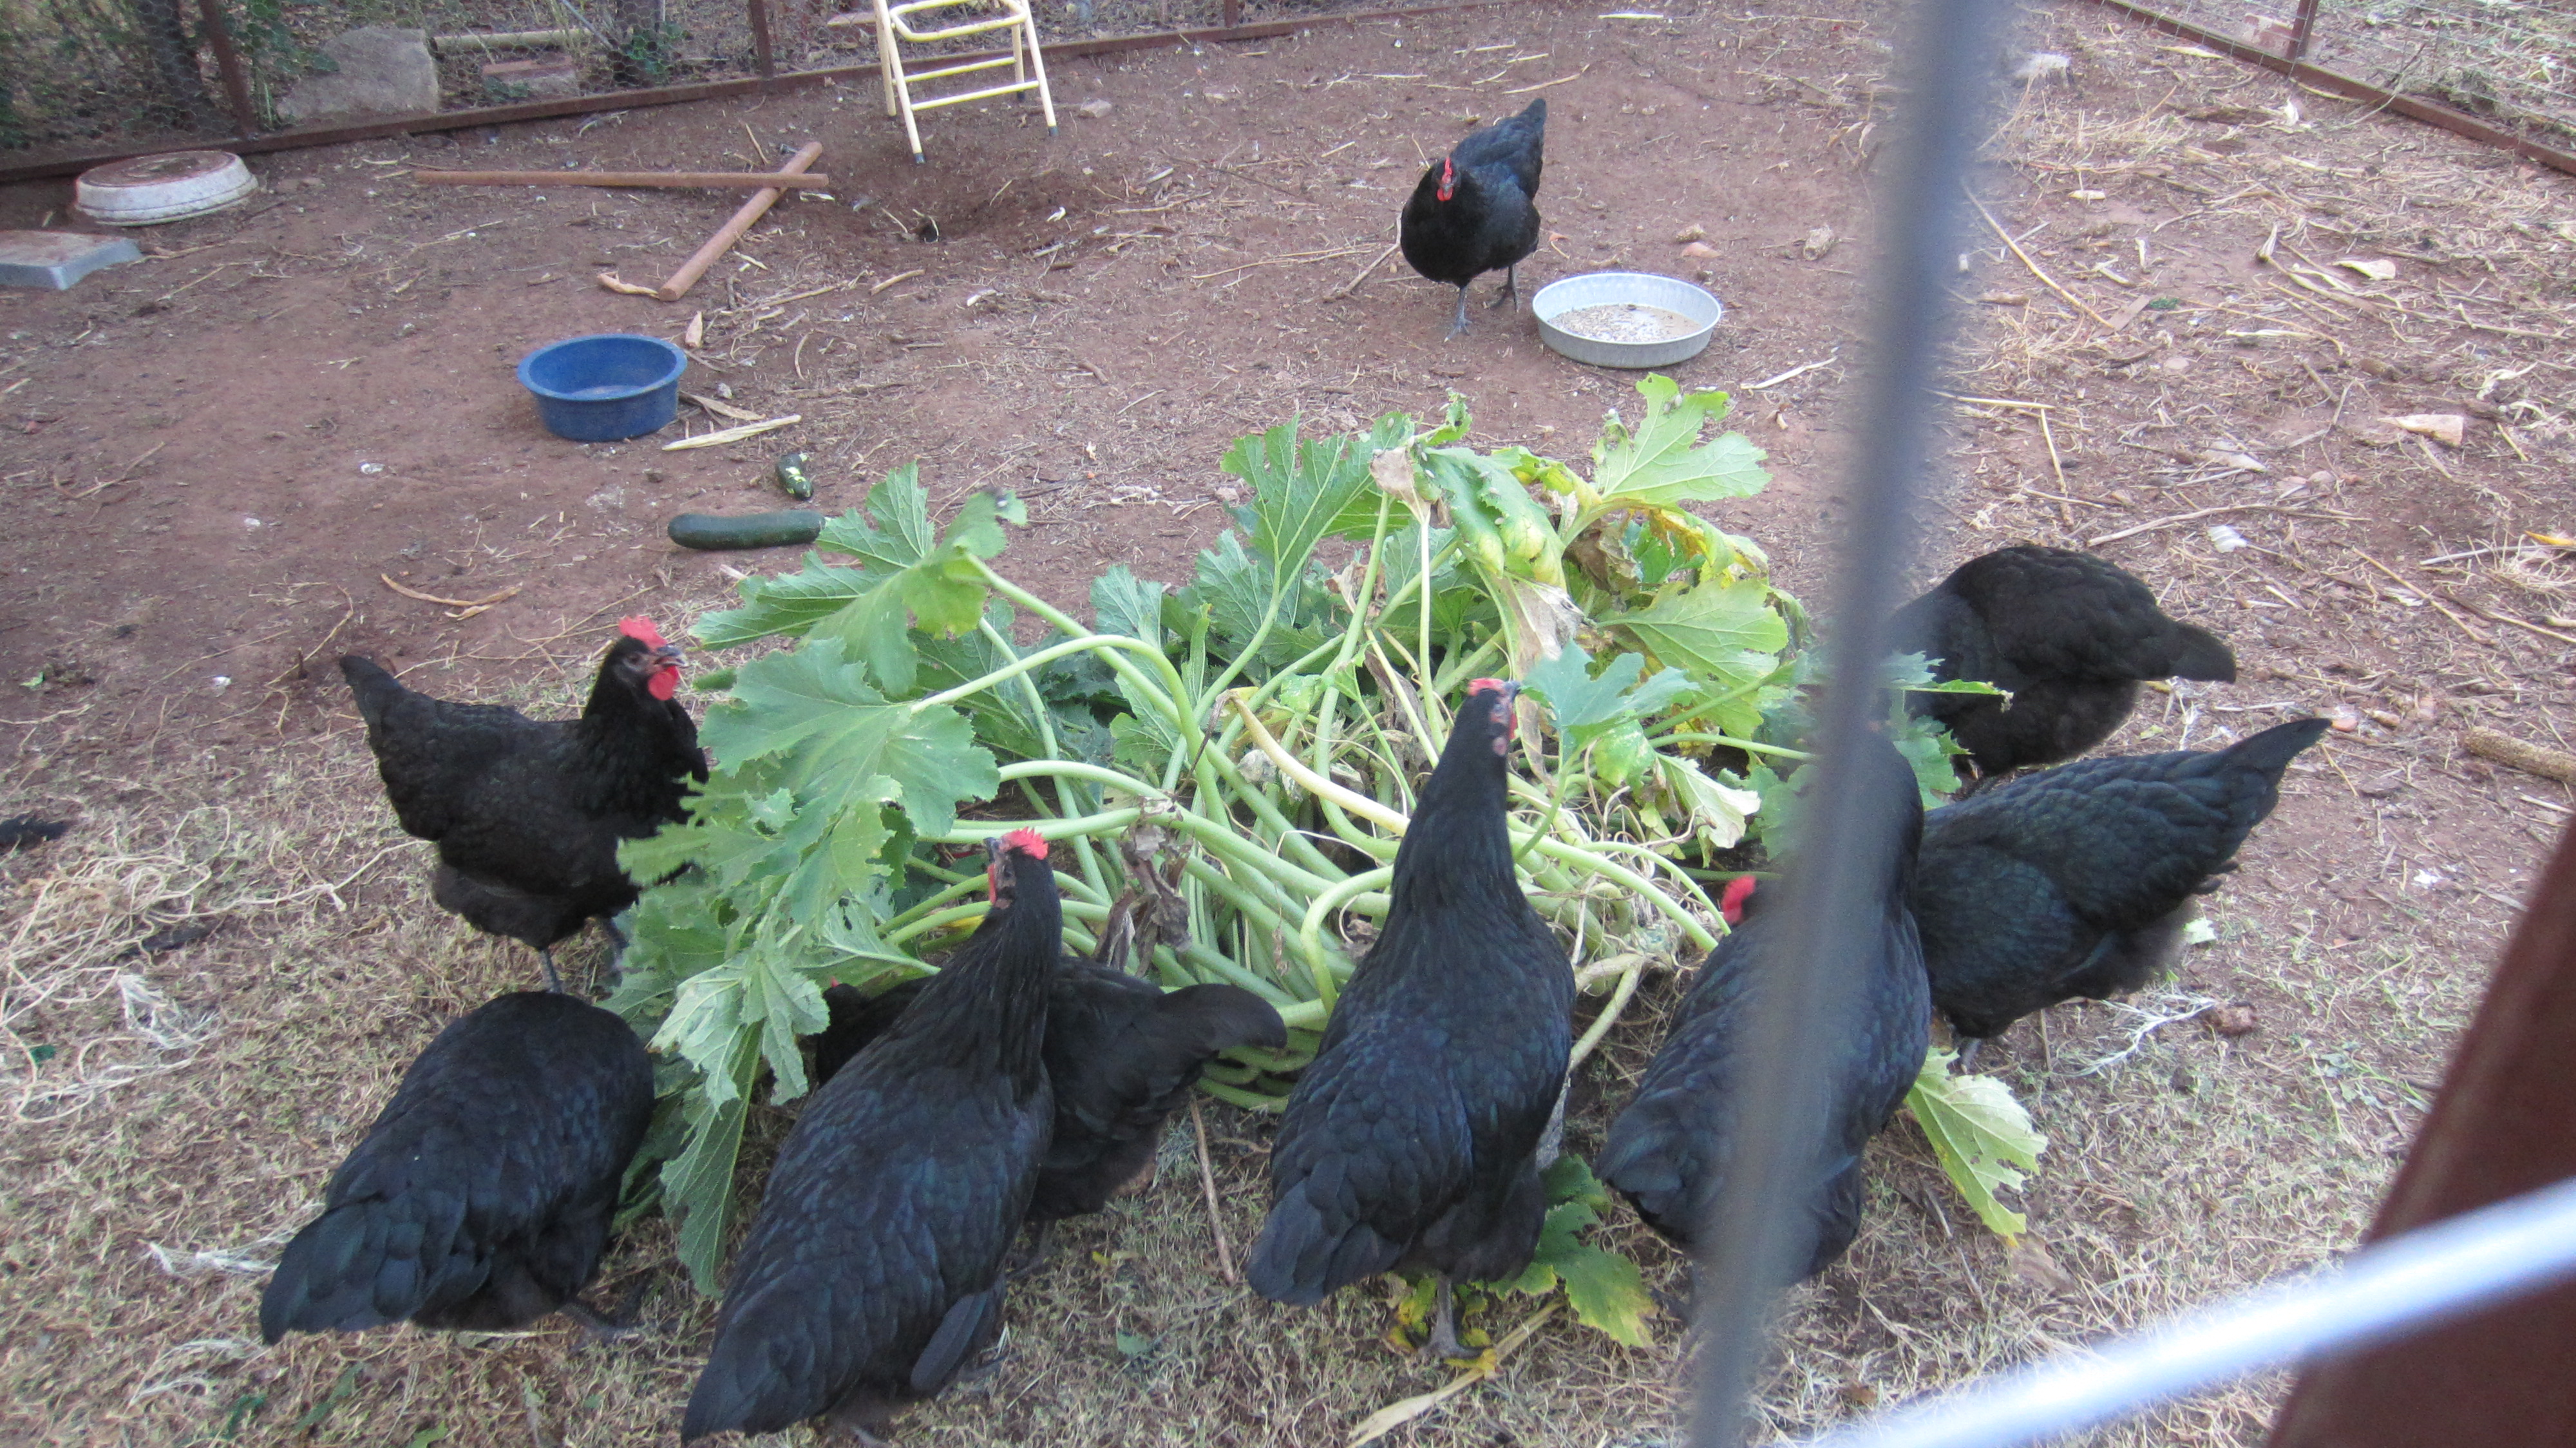 My black beauties~~ 23 weeks old---3eggs a day so far
here they are devouring a squash plant